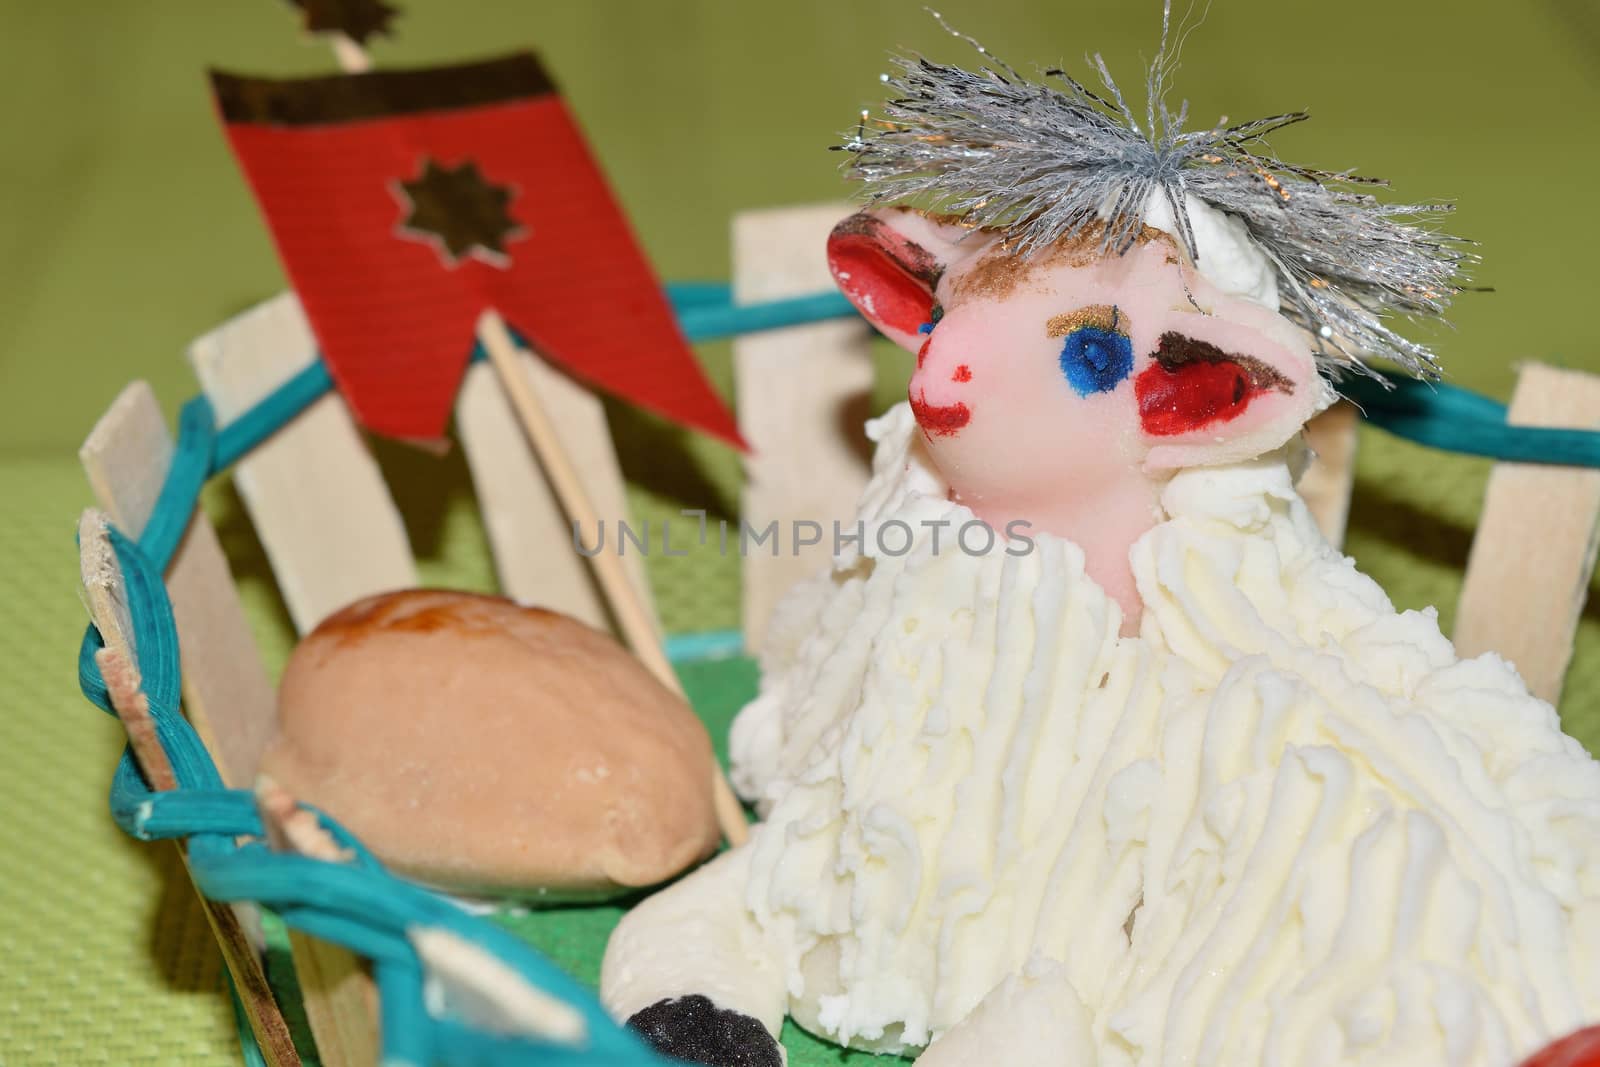 close up of marzipan Easter lamb and fruit in a basket